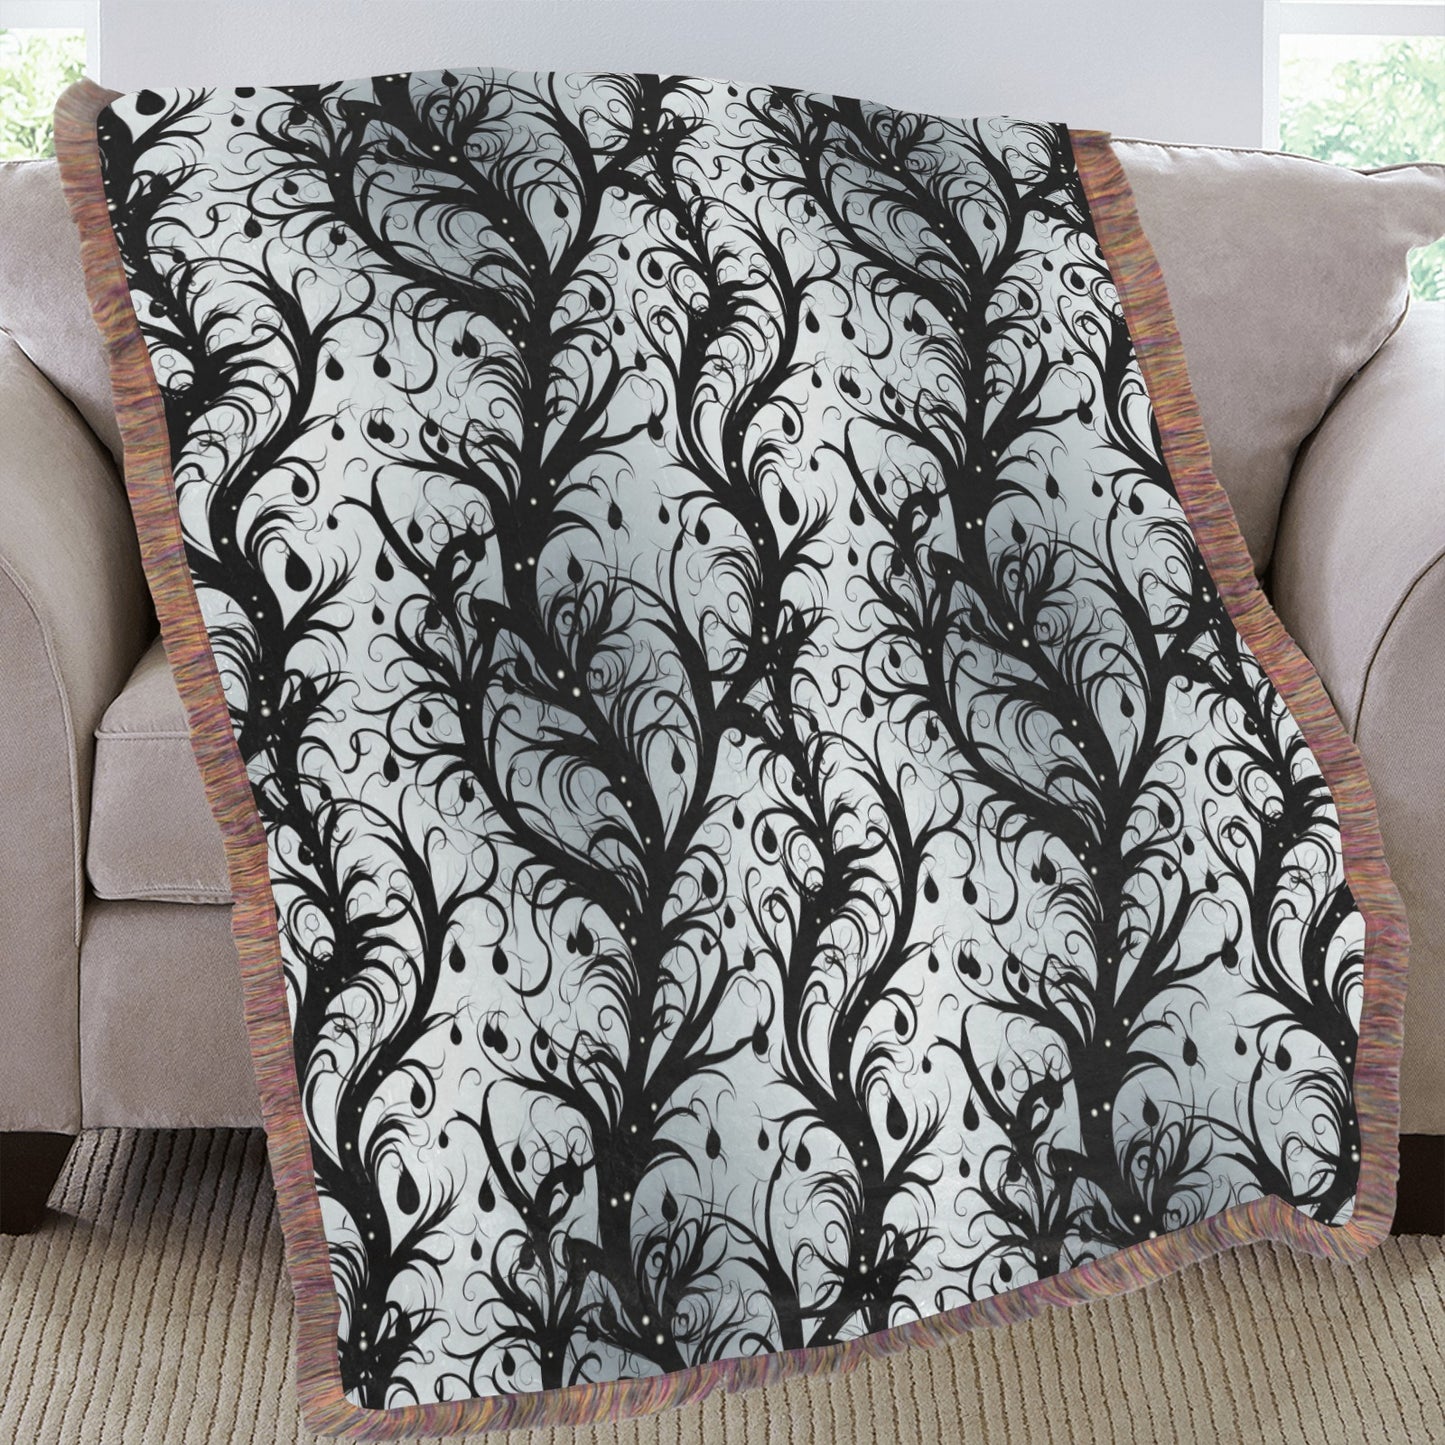 Vines Of Darkness Ultra-Soft Mixed Fringe Blanket (60x80 inch)